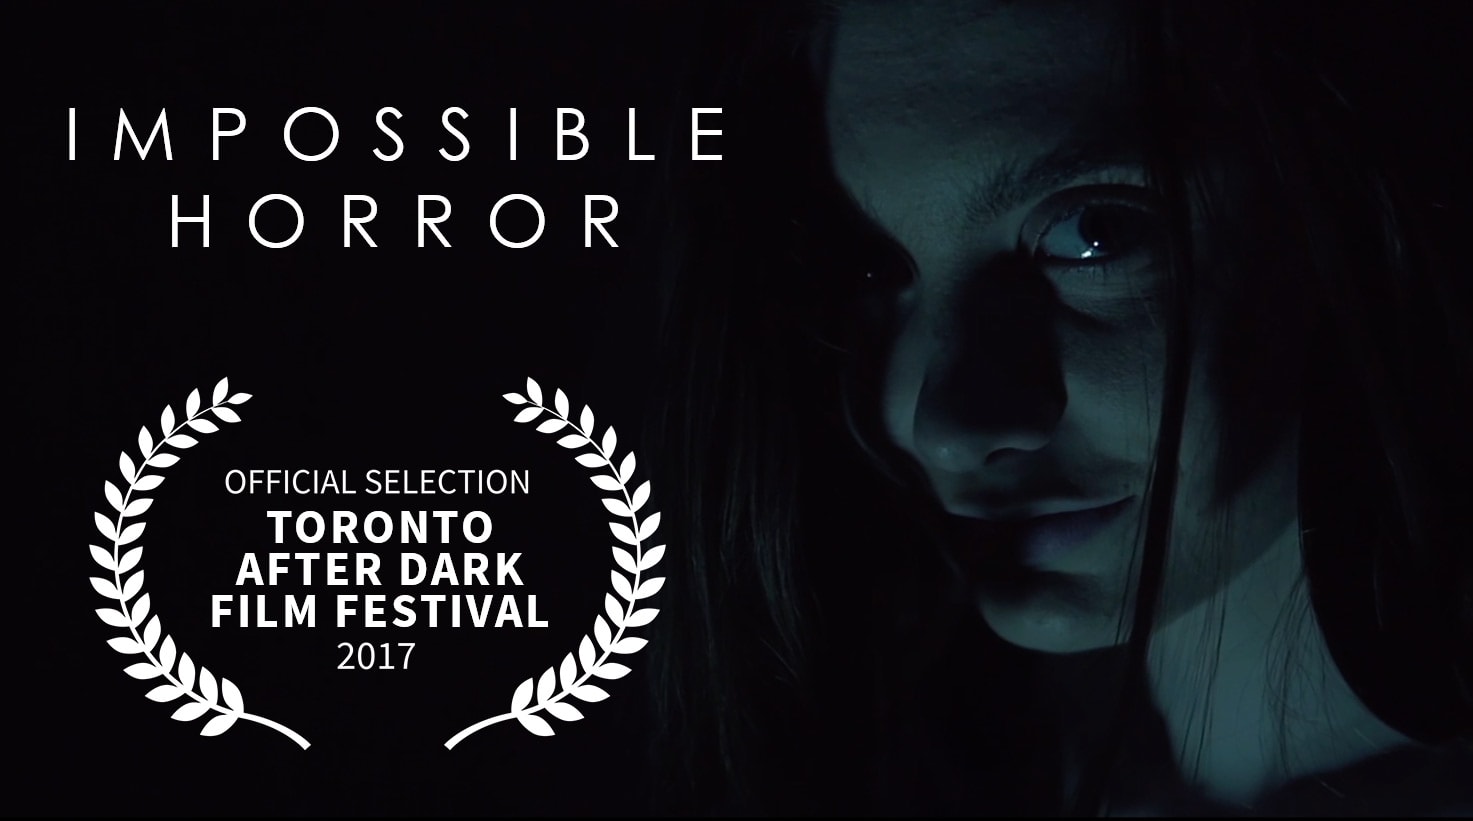 Toronto Indie Film Impossible Horror To Have World Premiere At Toronto After Dark Film Festival